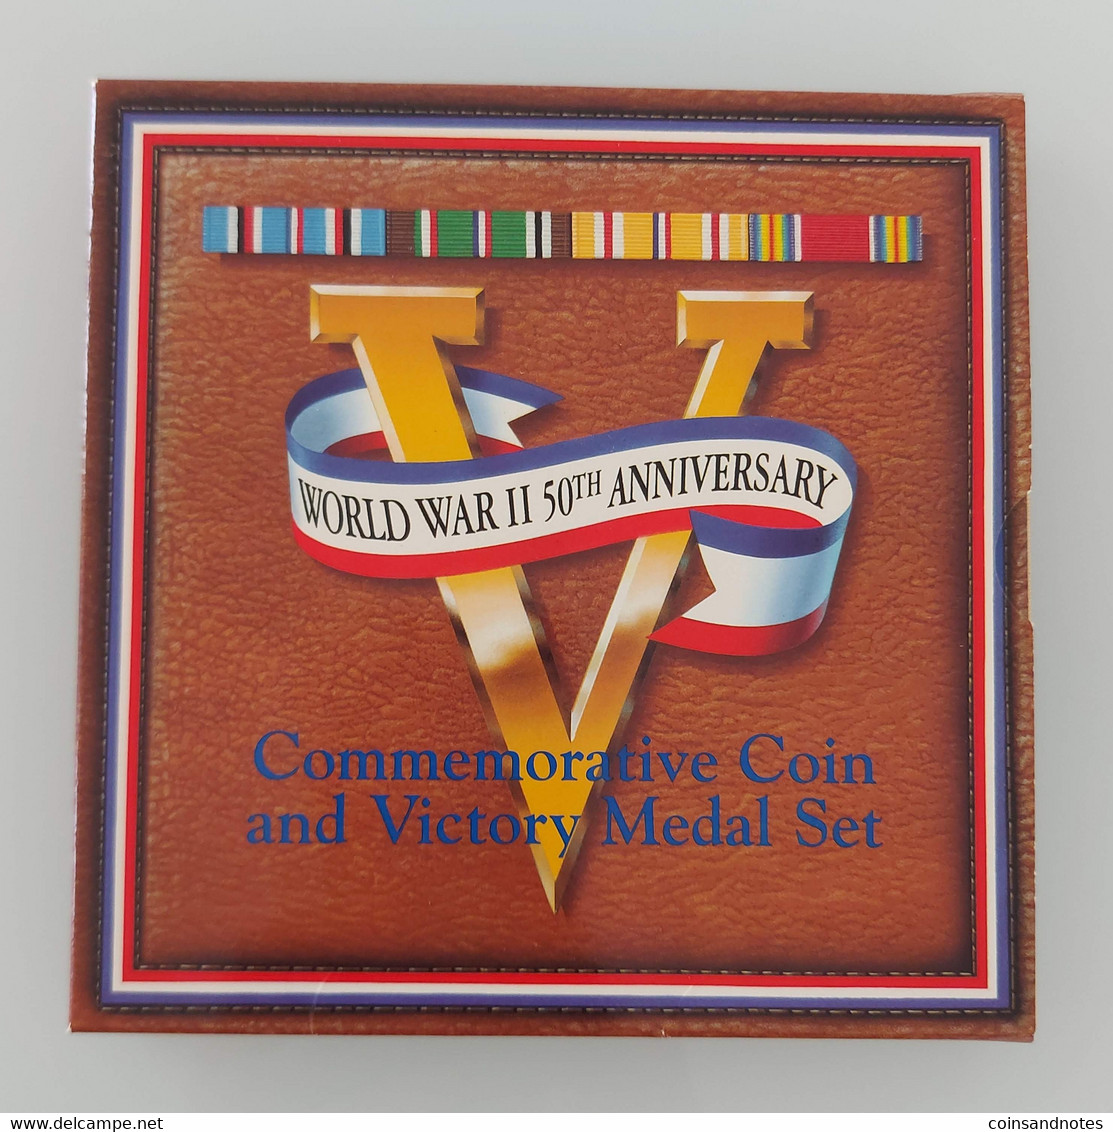 USA 1993 - Comm. Coin & Victory Medal Set 'WWII 50th Anniversary’ - COA - Collections